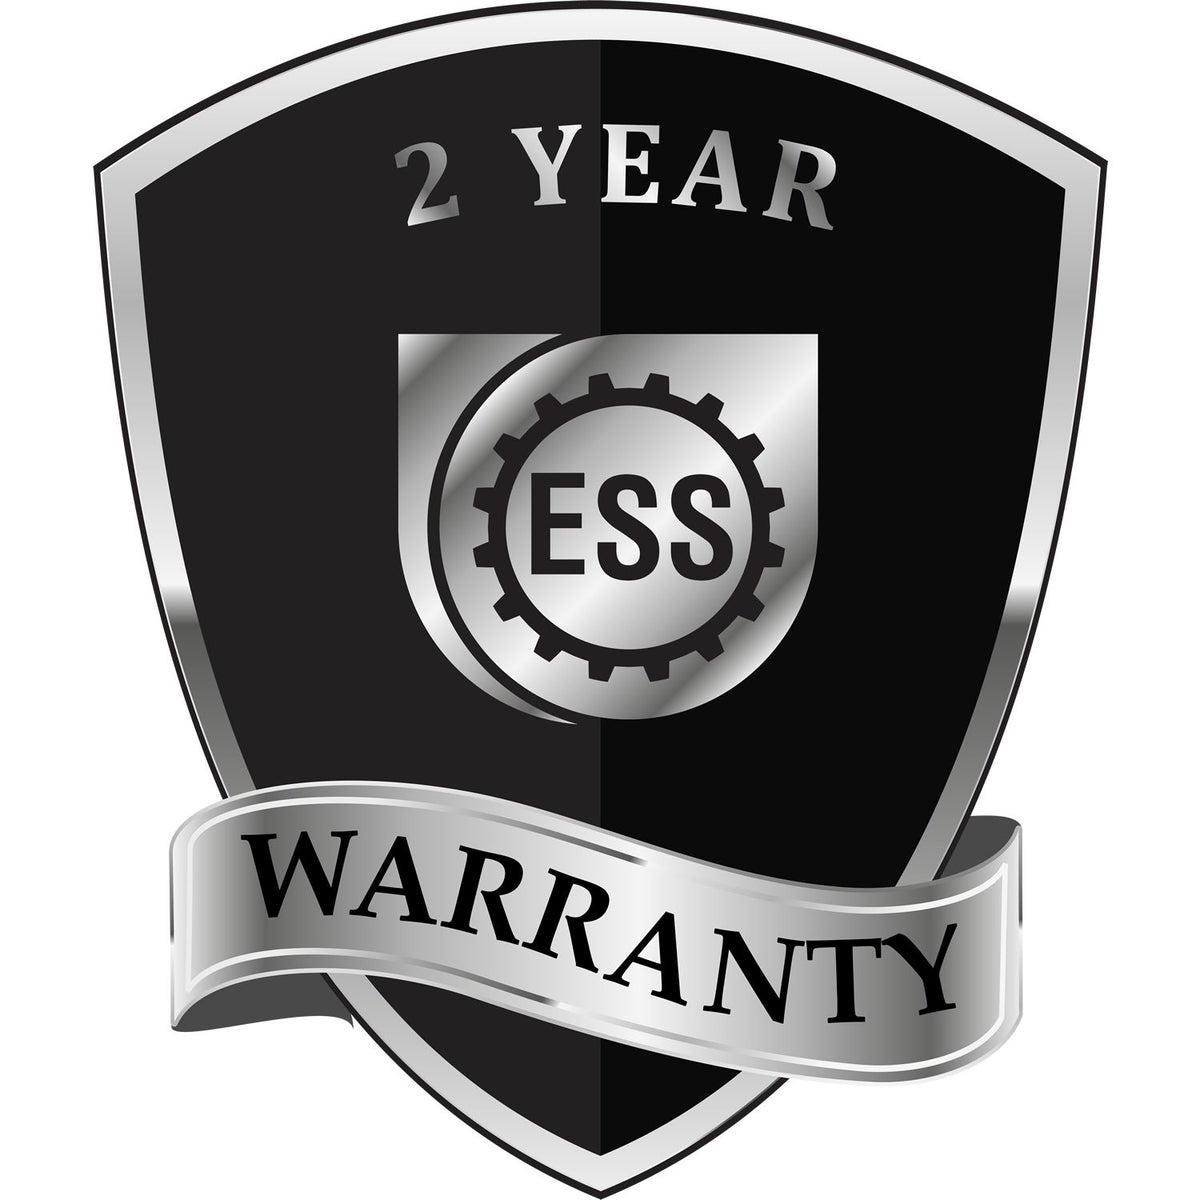 A black and silver badge or emblem showing warranty information for the Gift Louisiana Architect Seal